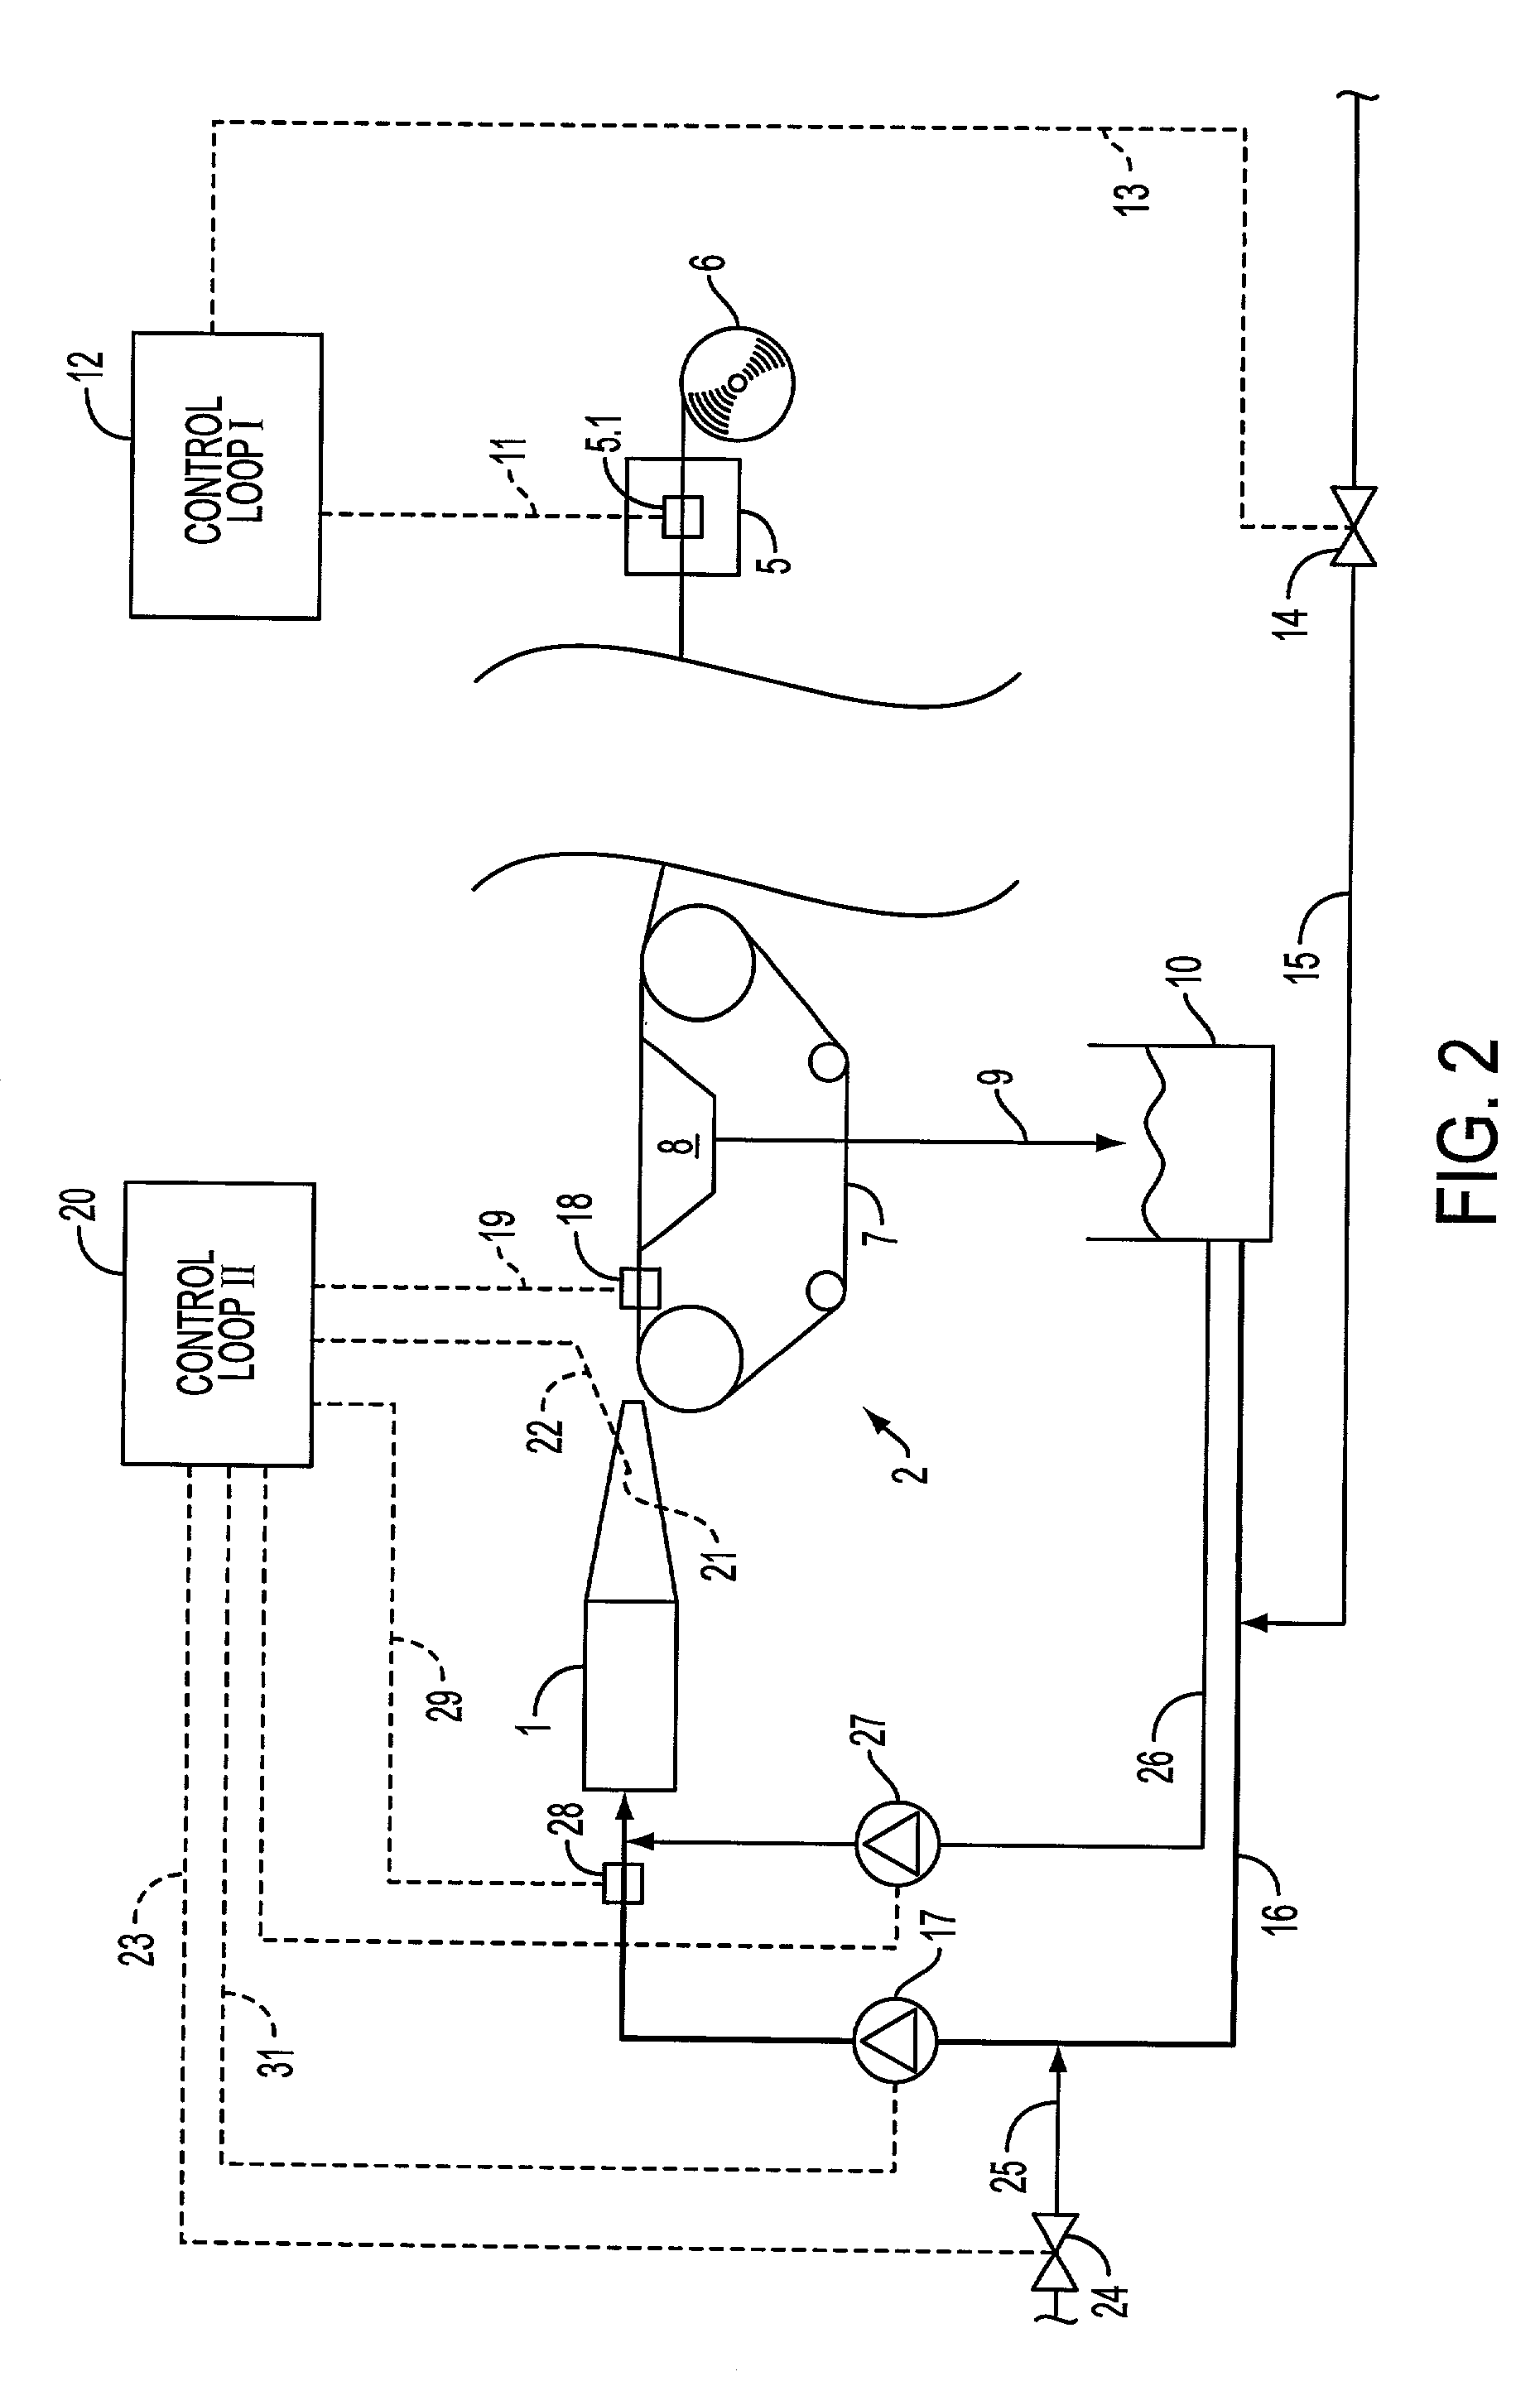 Method to control or regulate the basis weight of a paper or cardboard web